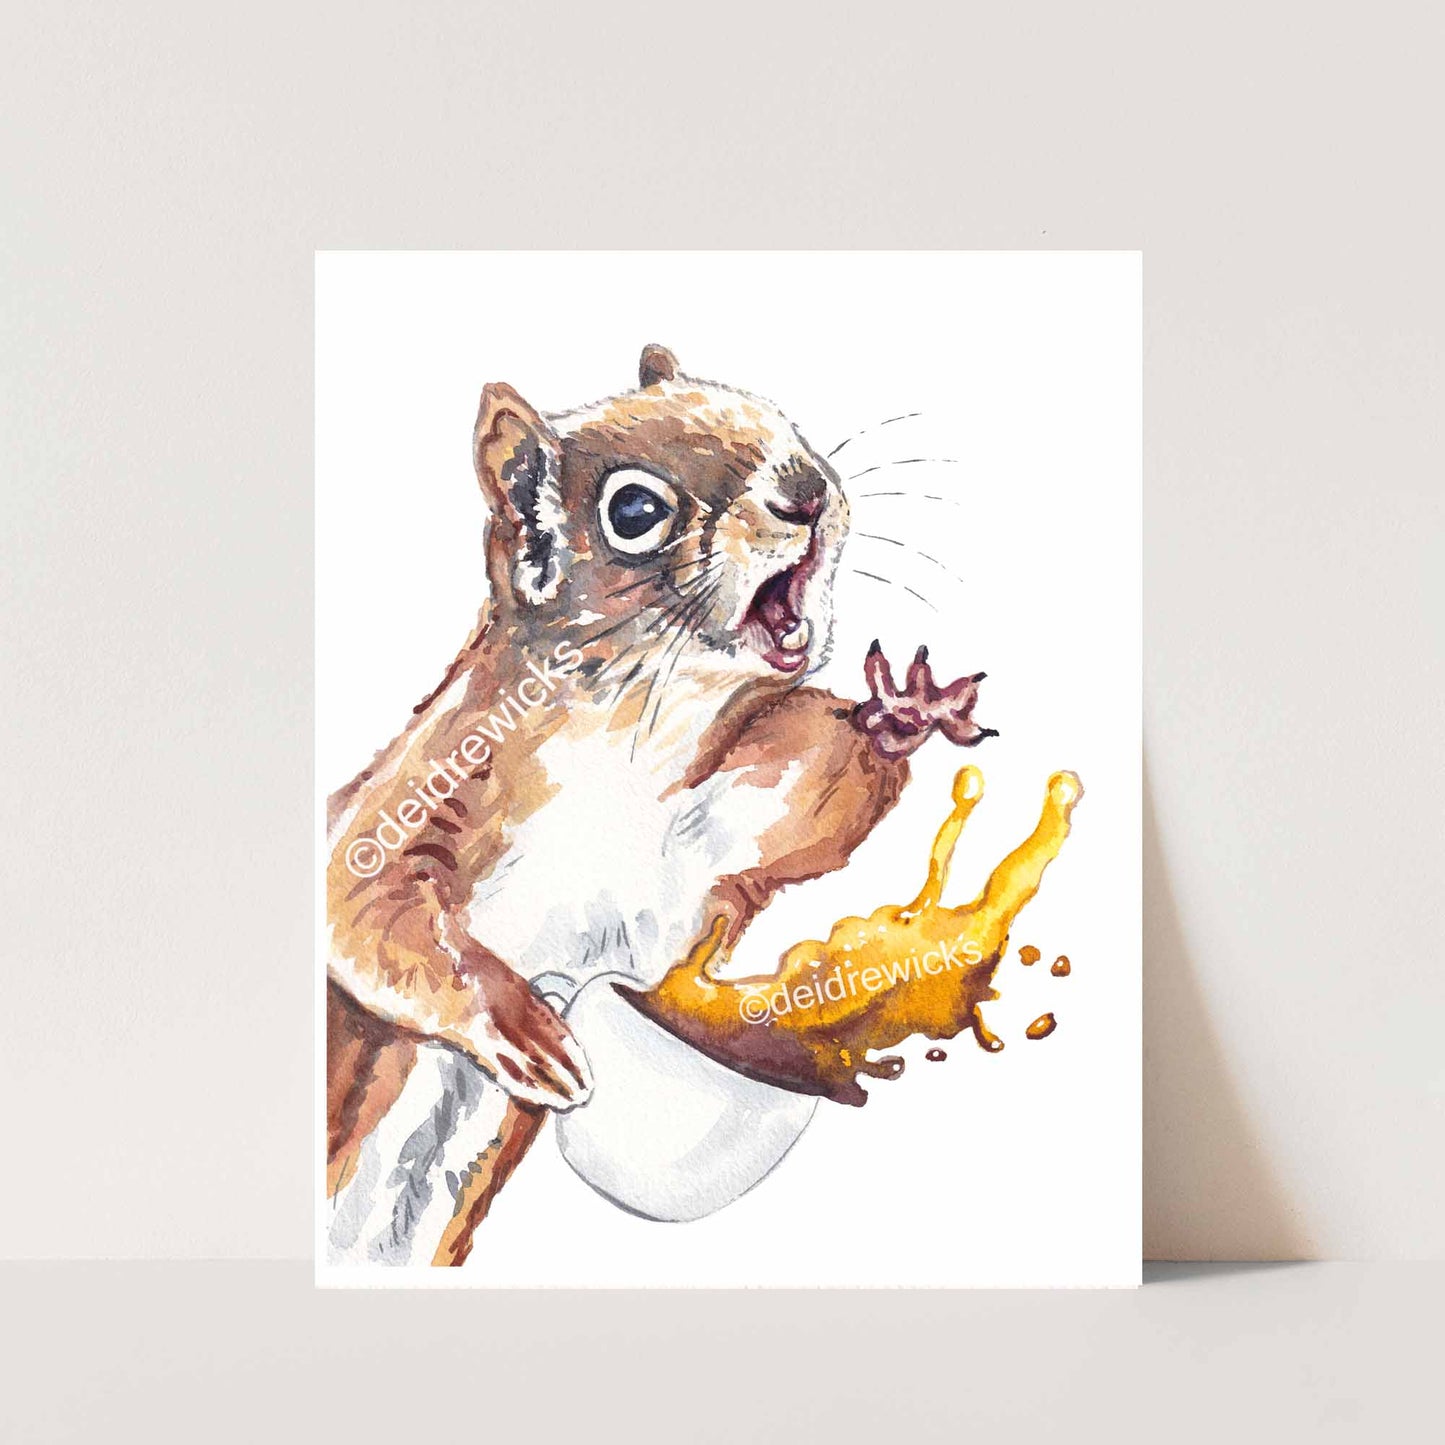 Squirrel watercolour print featuring the moment a cup of coffee is spilled. Illustration by Deidre Wicks